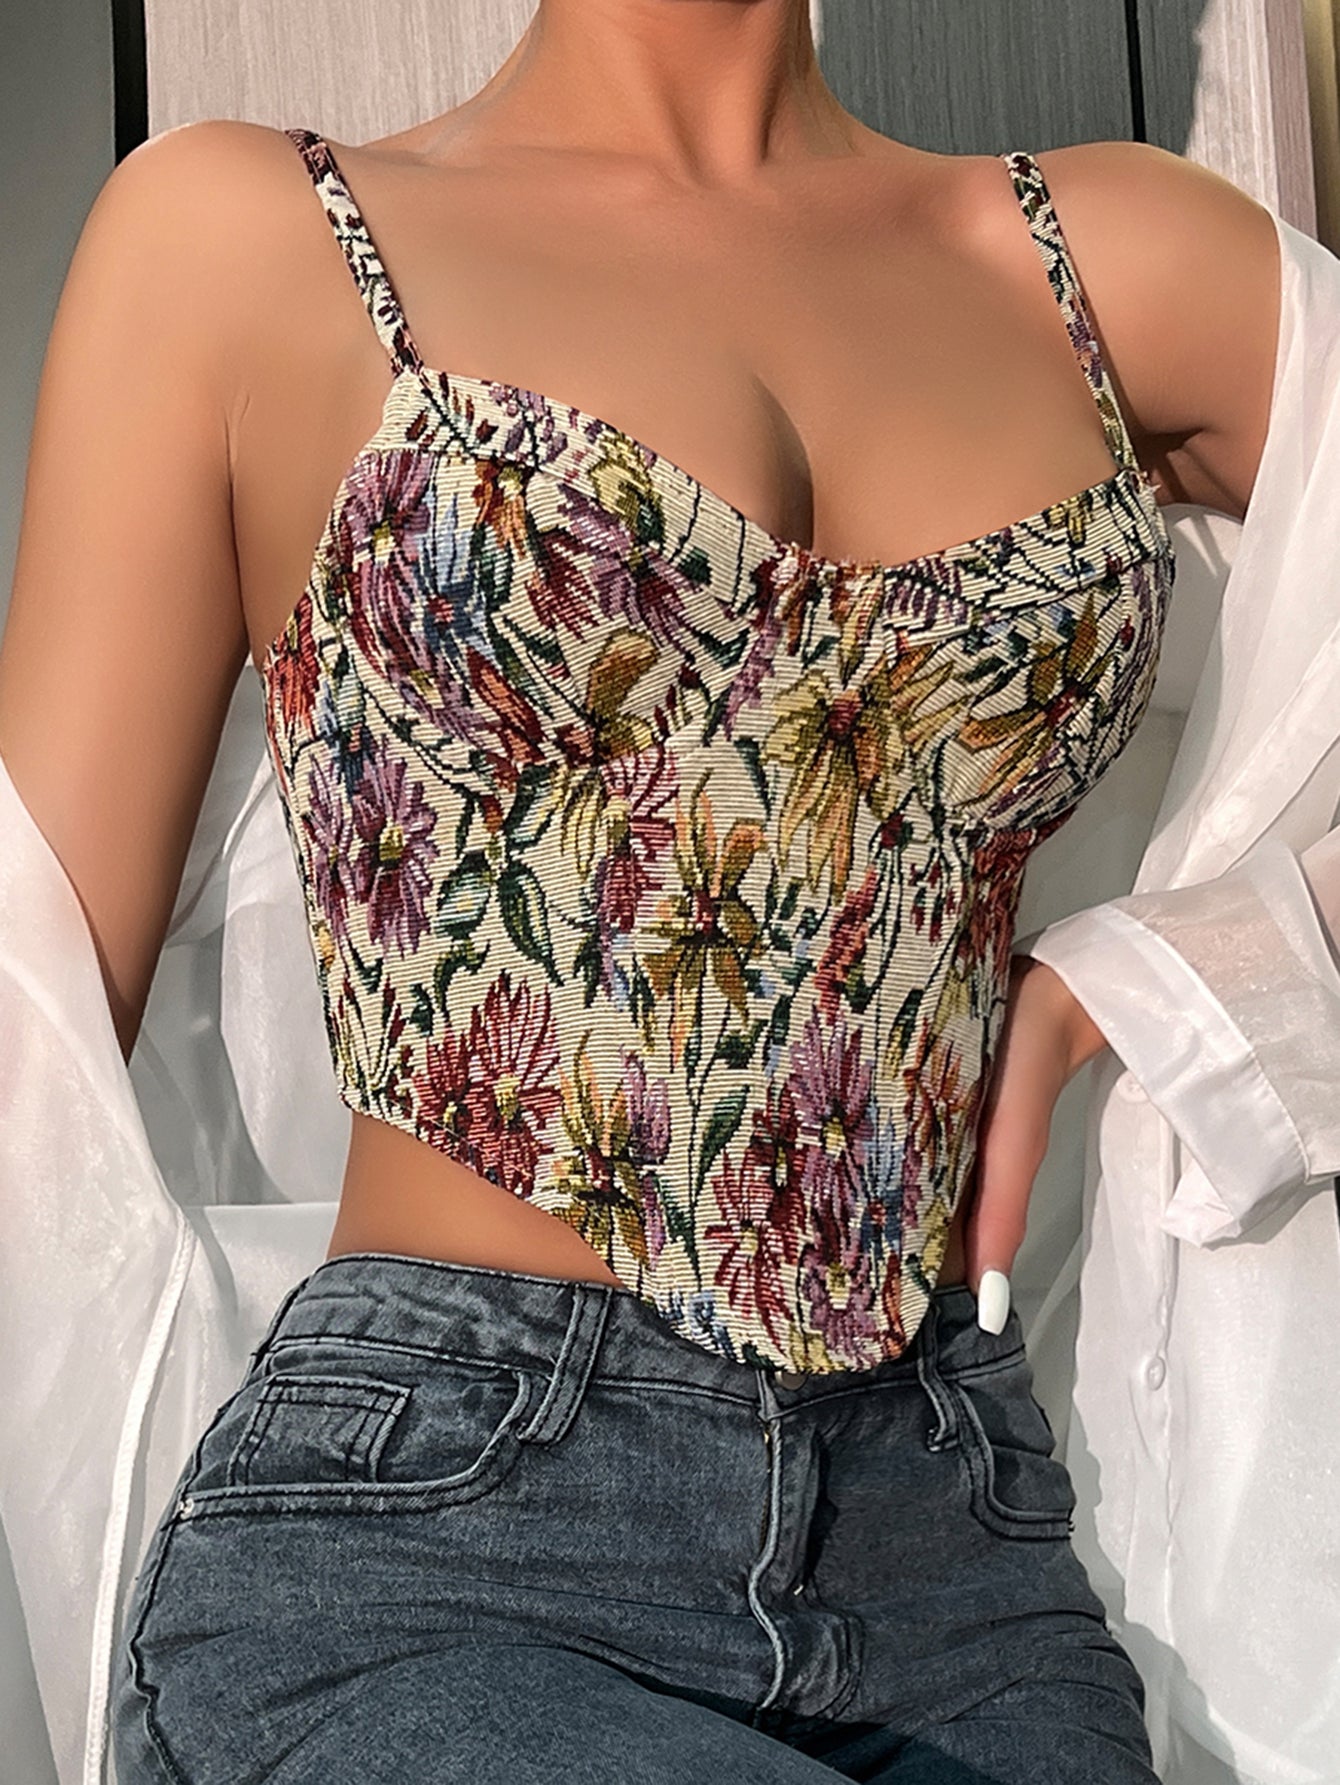 Retro Style Floral Digital Print Camisole Niche French Corset Top for Street Chic